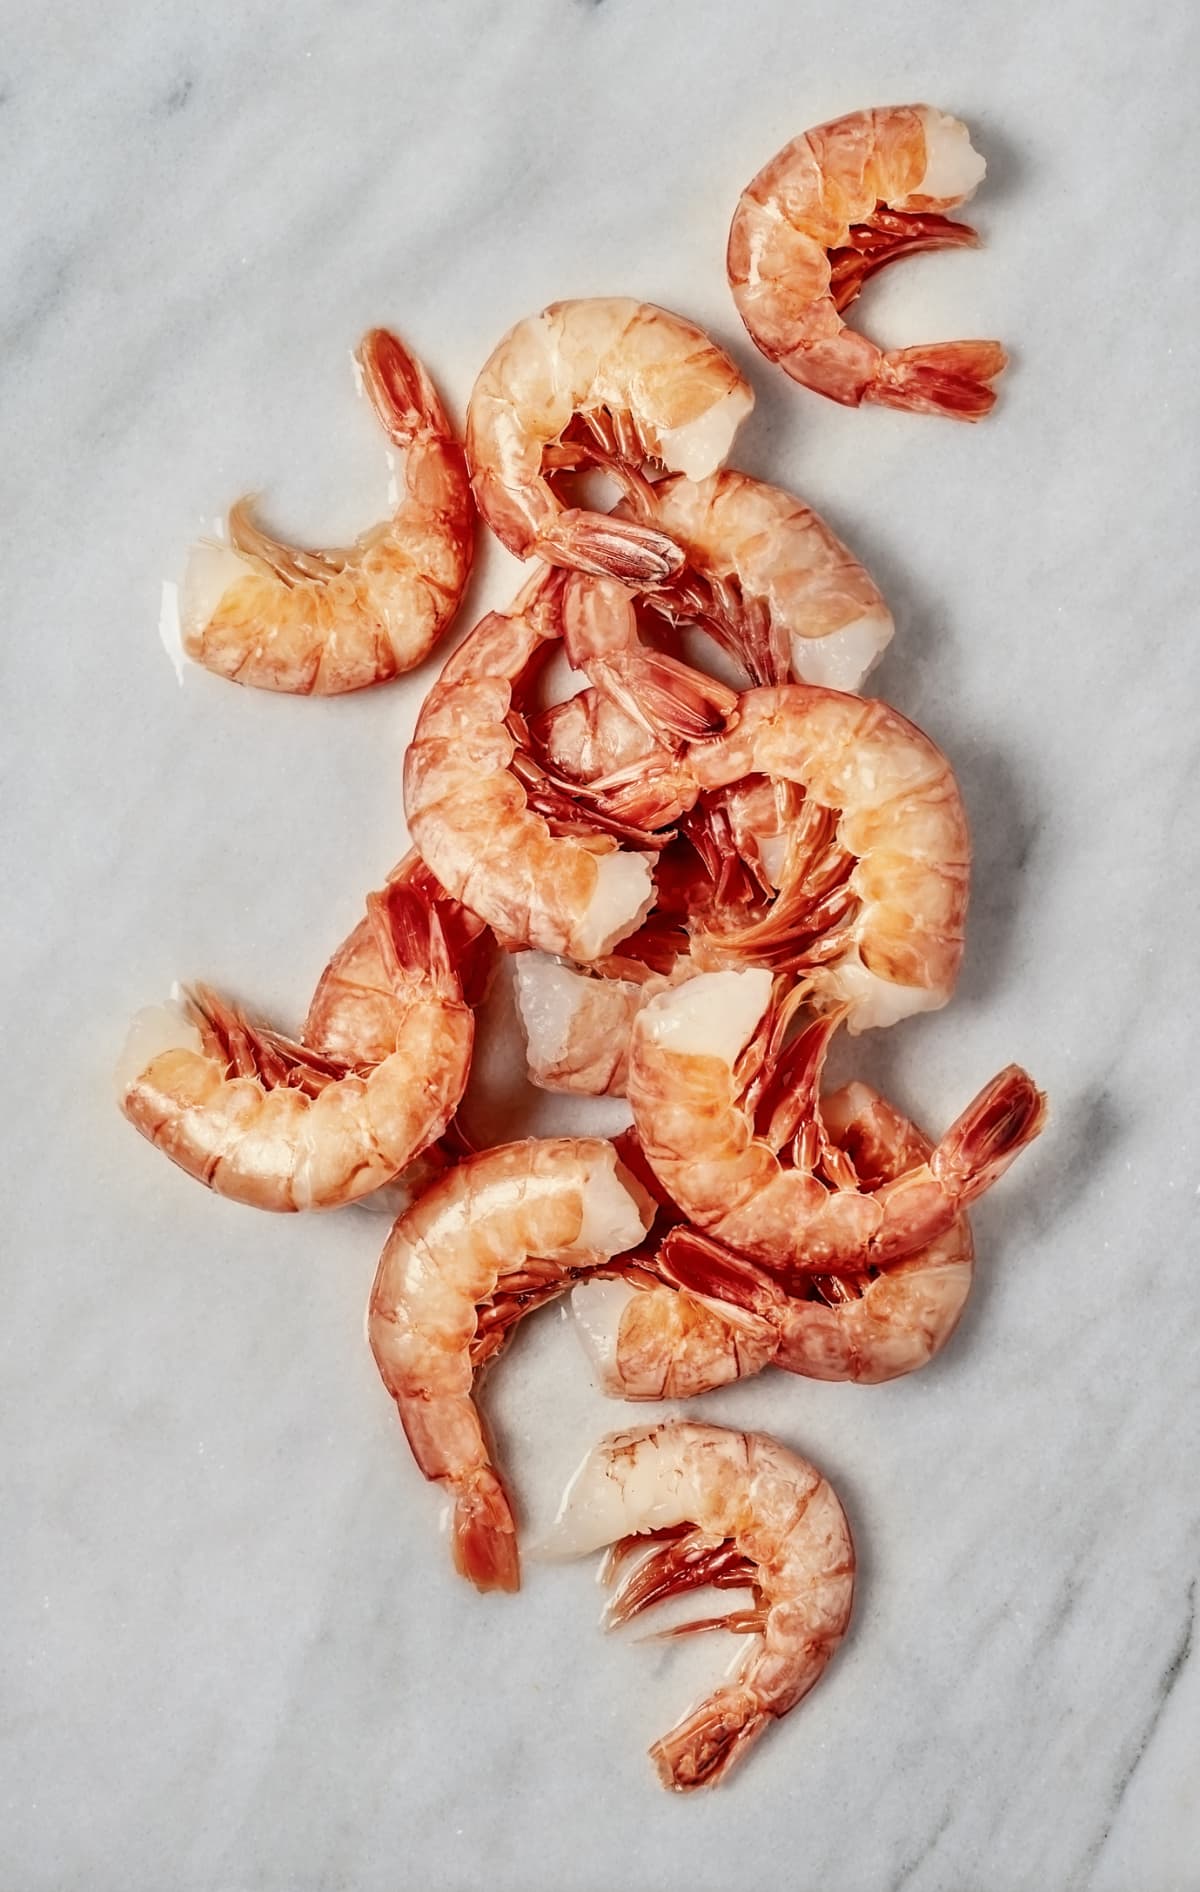 Raw shrimps with ice cubes on black background, copy space. Top view on appetizing seafood snack, restaurant serving backdrop.